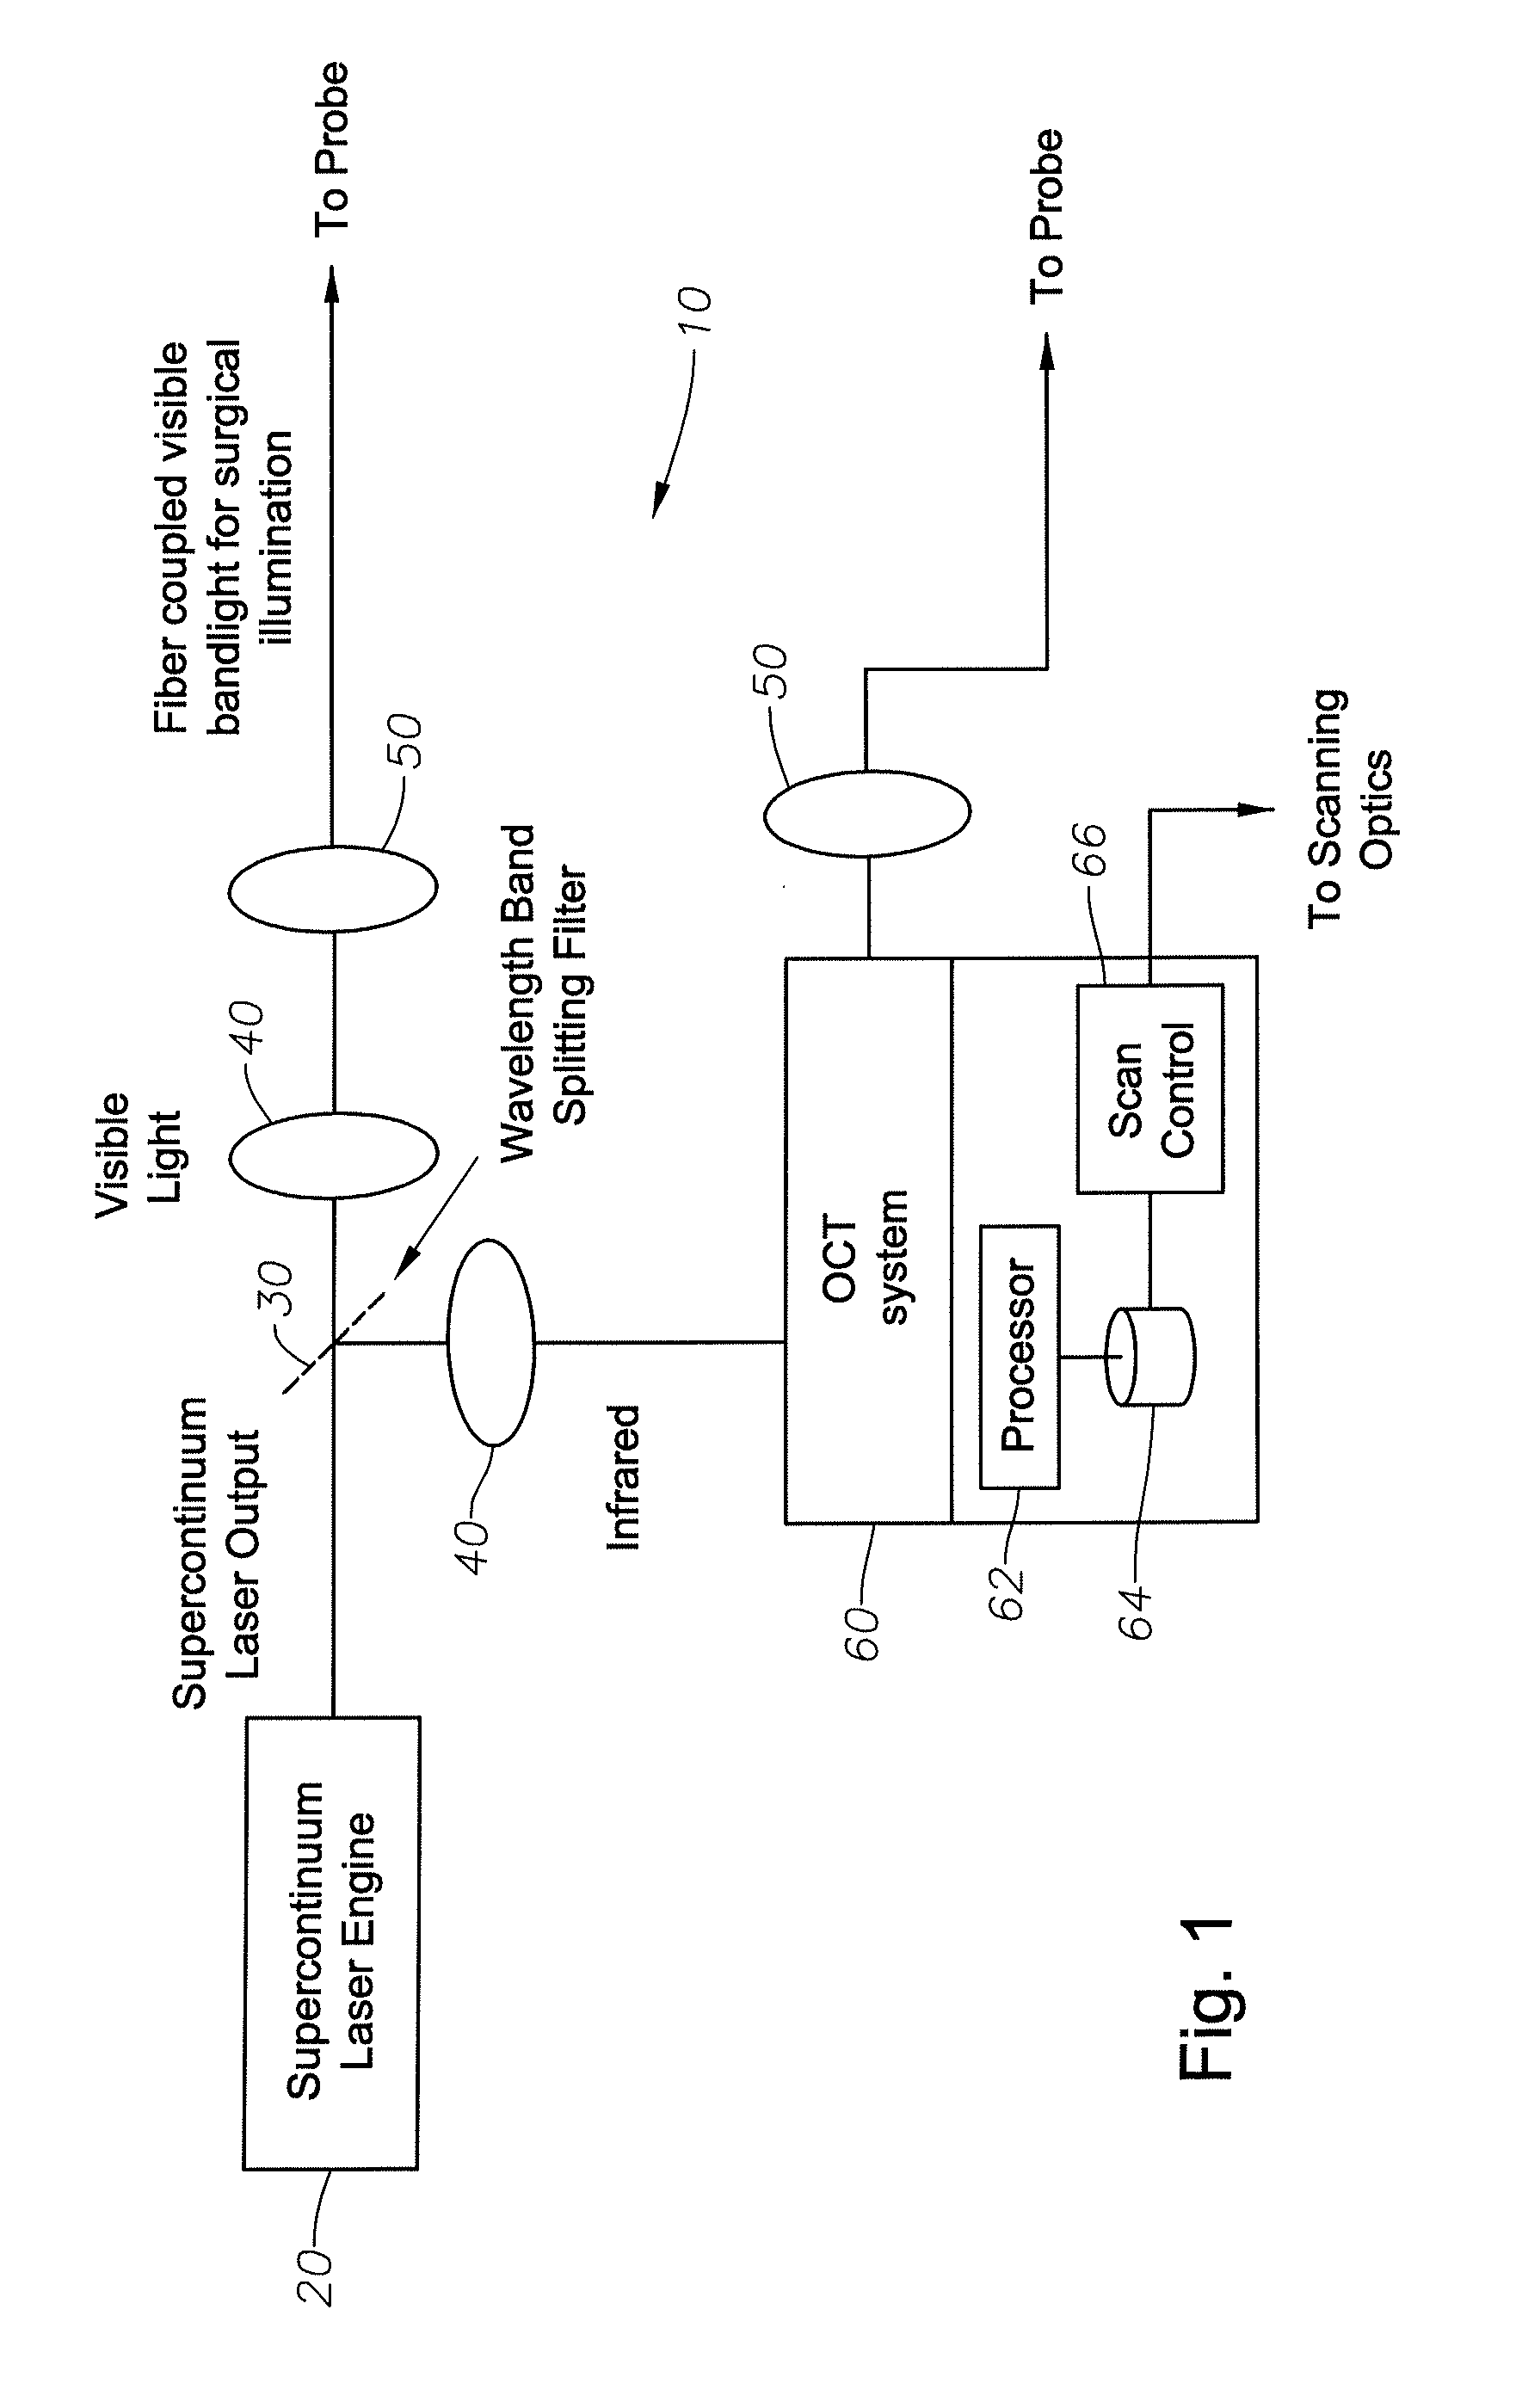 Optical coherence tomography and illumination using common light source